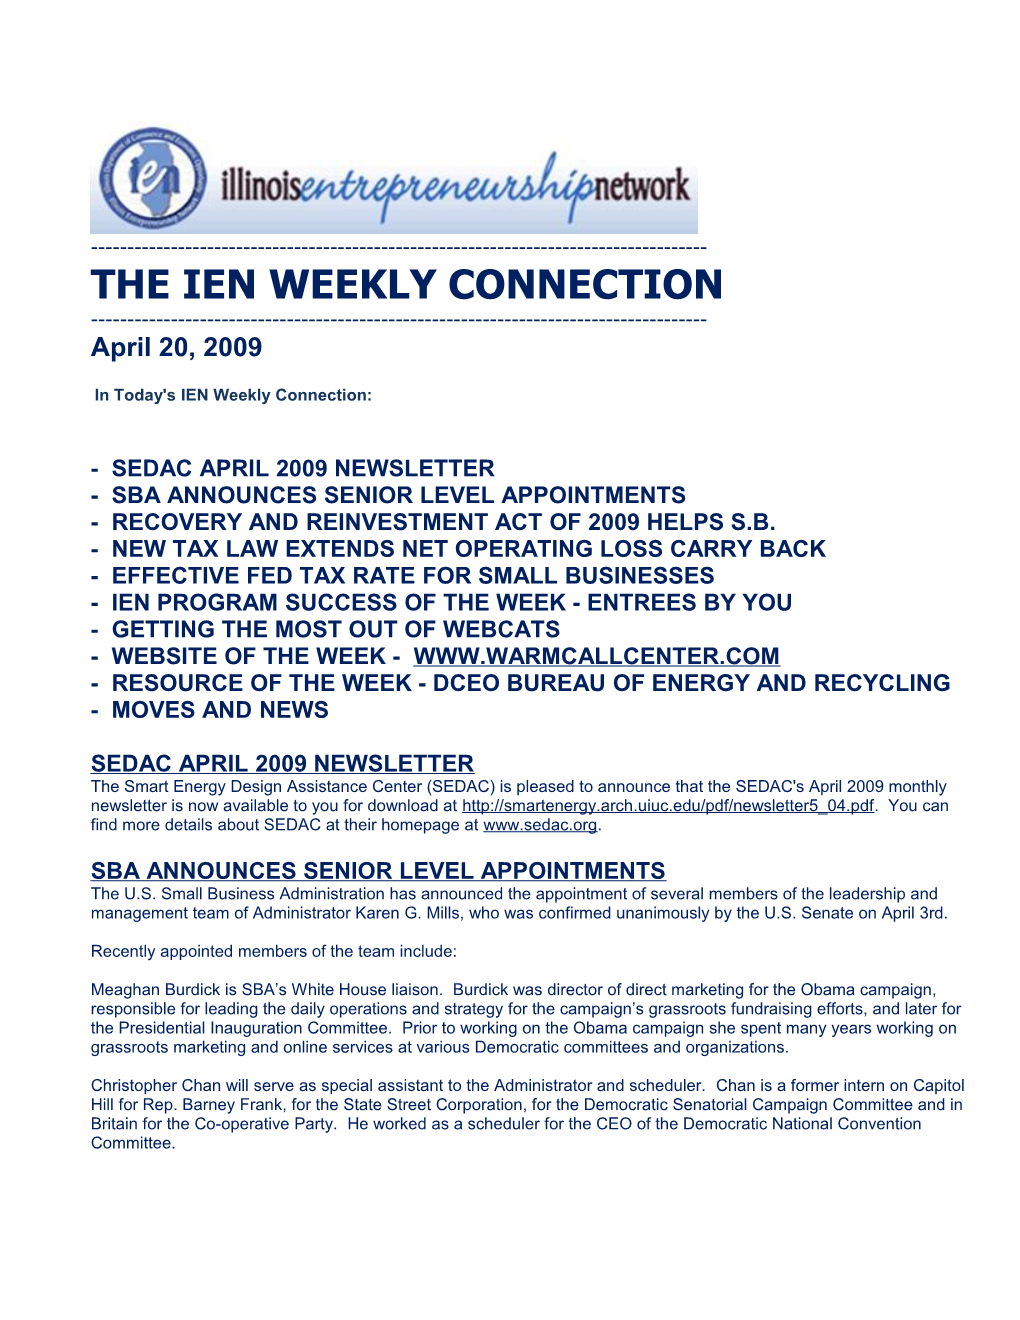 In Today'sien Weekly Connection